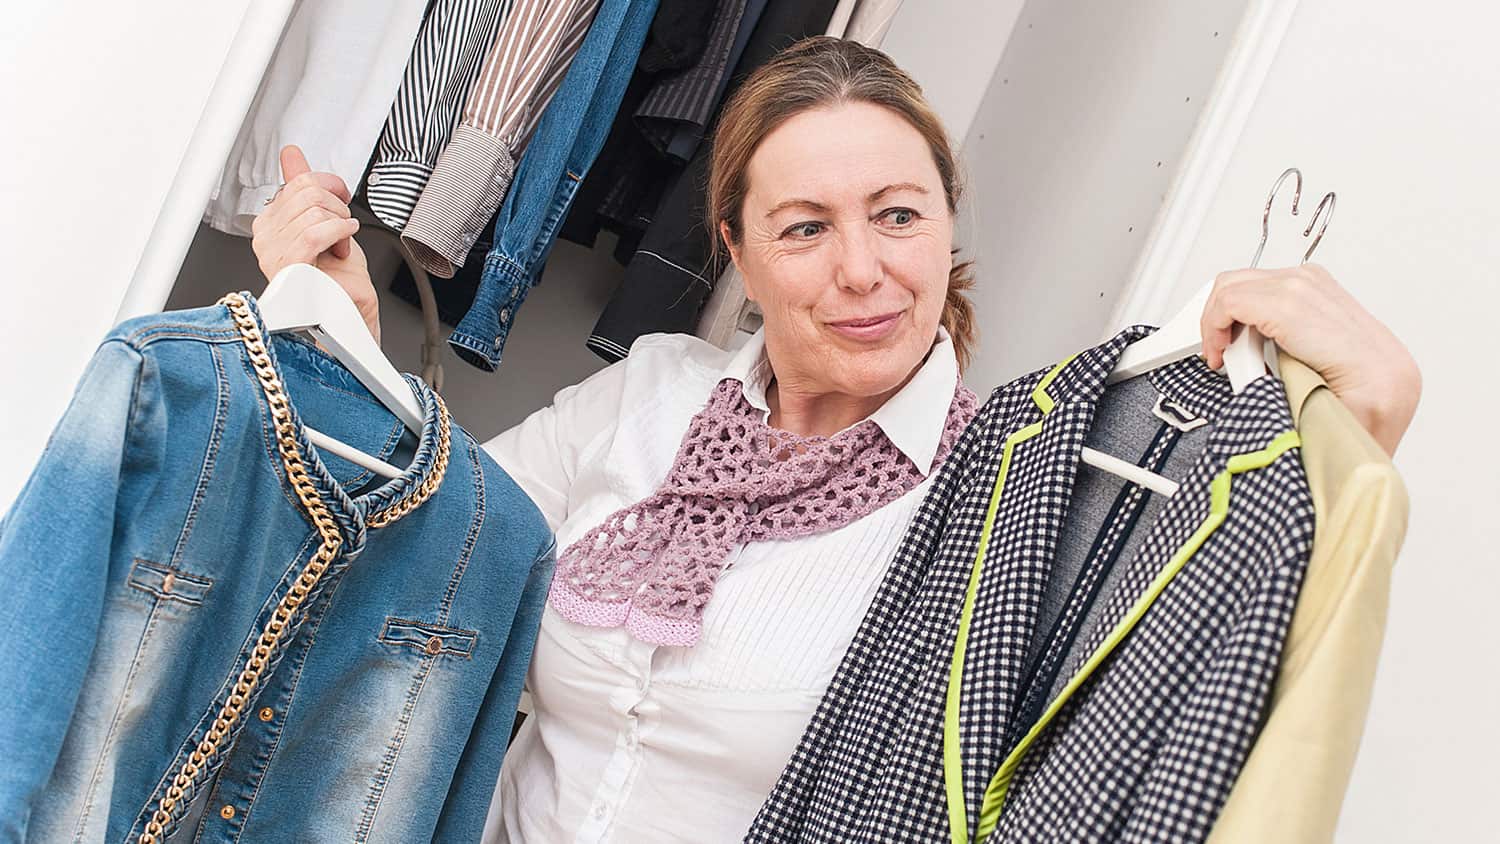 Do We Really Need More Clothes? Is Fashion Over 60 About Quality or ...